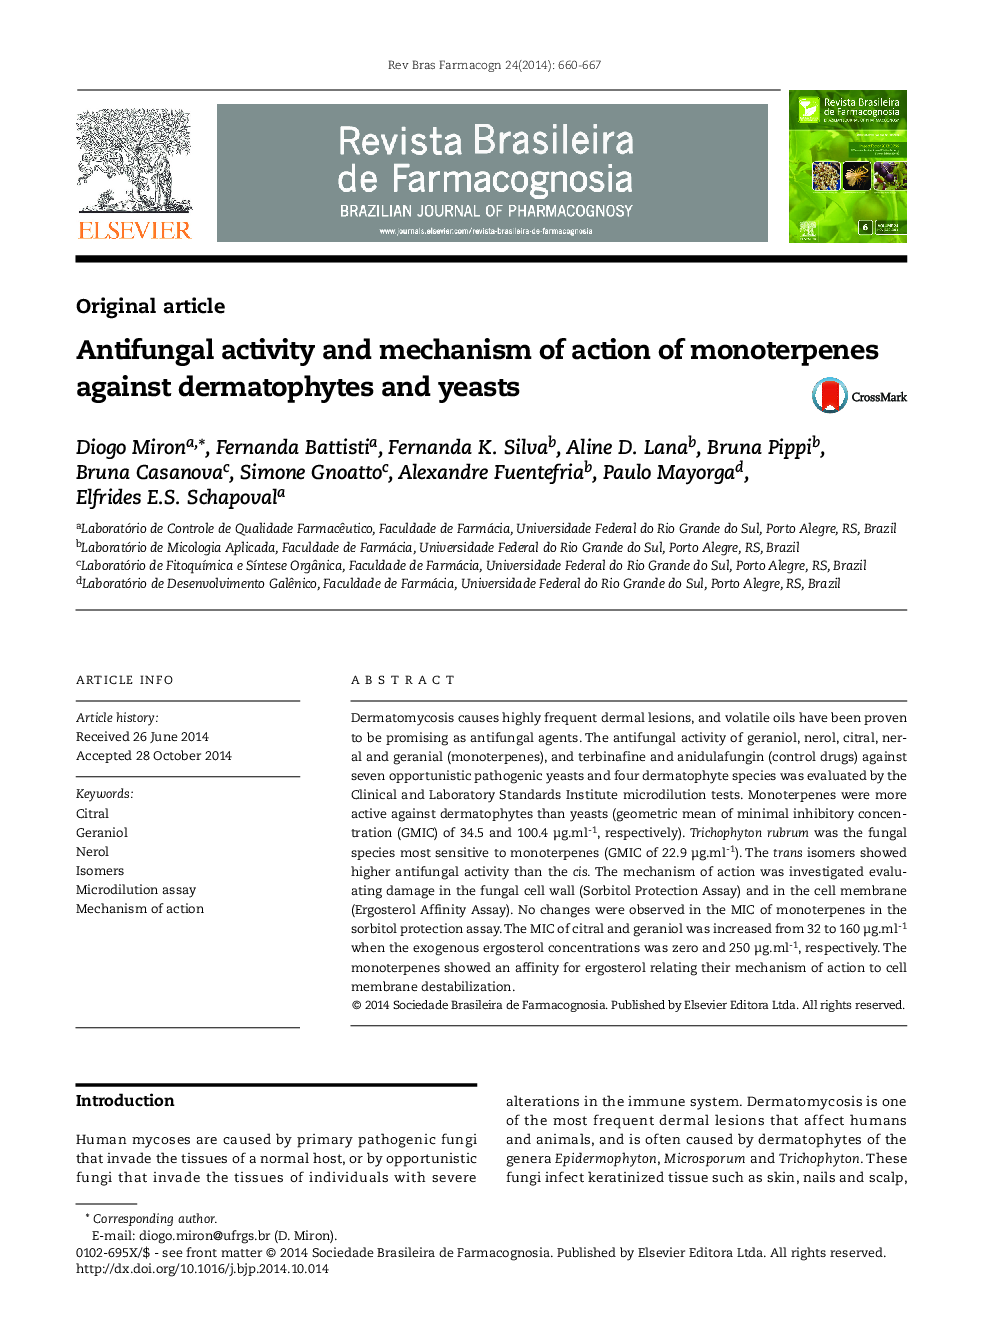 Antifungal activity and mechanism of action of monoterpenes against dermatophytes and yeasts